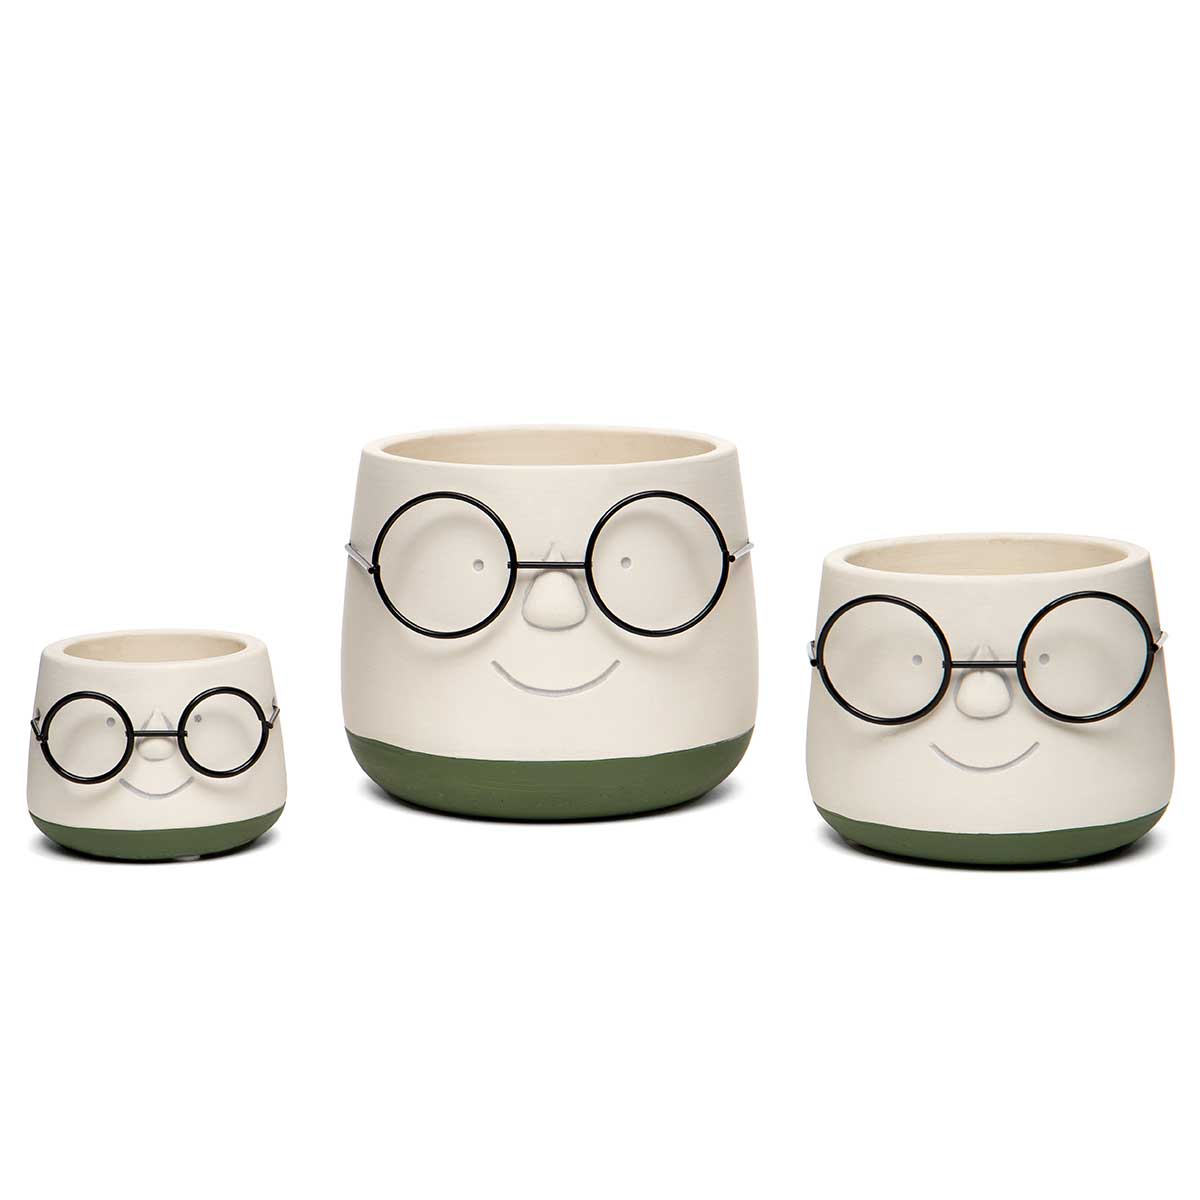 POT POINDEXTER LARGE 6IN X 5.25IN WHITE/GREEN FACE/WIRE GLASSES